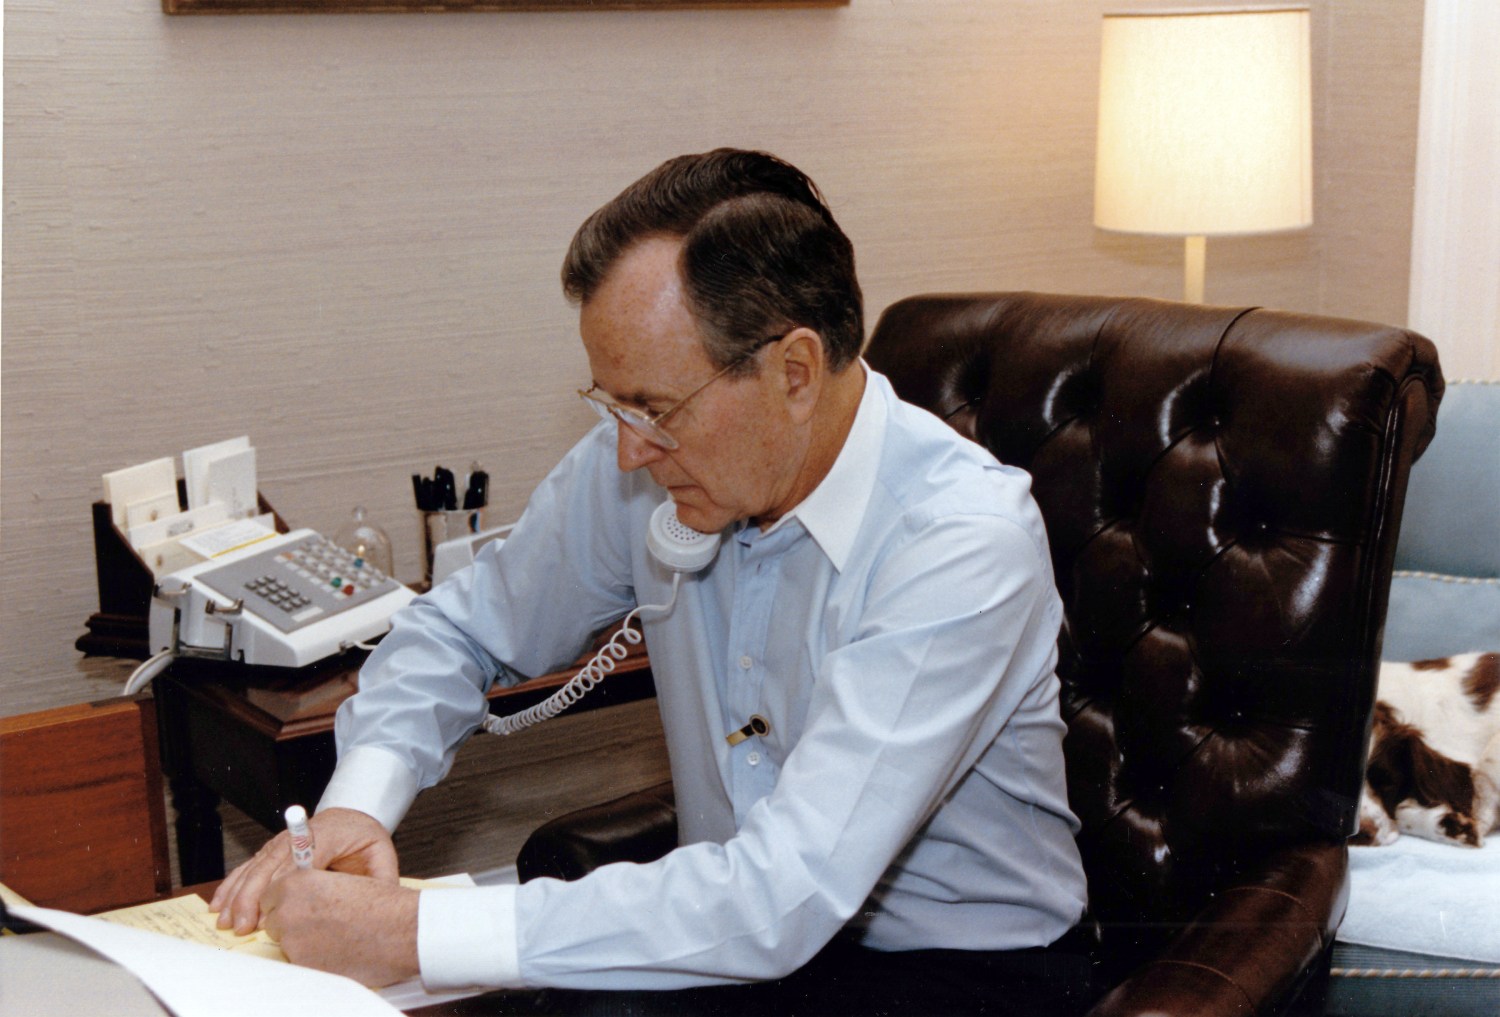 United States President George H.W. Bush speaks by telephone to US Secretary of State James A. Baker, III after the Secretary's first meeting with Foreign Minister Tariq Aziz of Iraq at the White House in Washington, DC on January 9, 1991. Photo by Carol T. Powers / White House via CNP/ABACAPRESS.COM